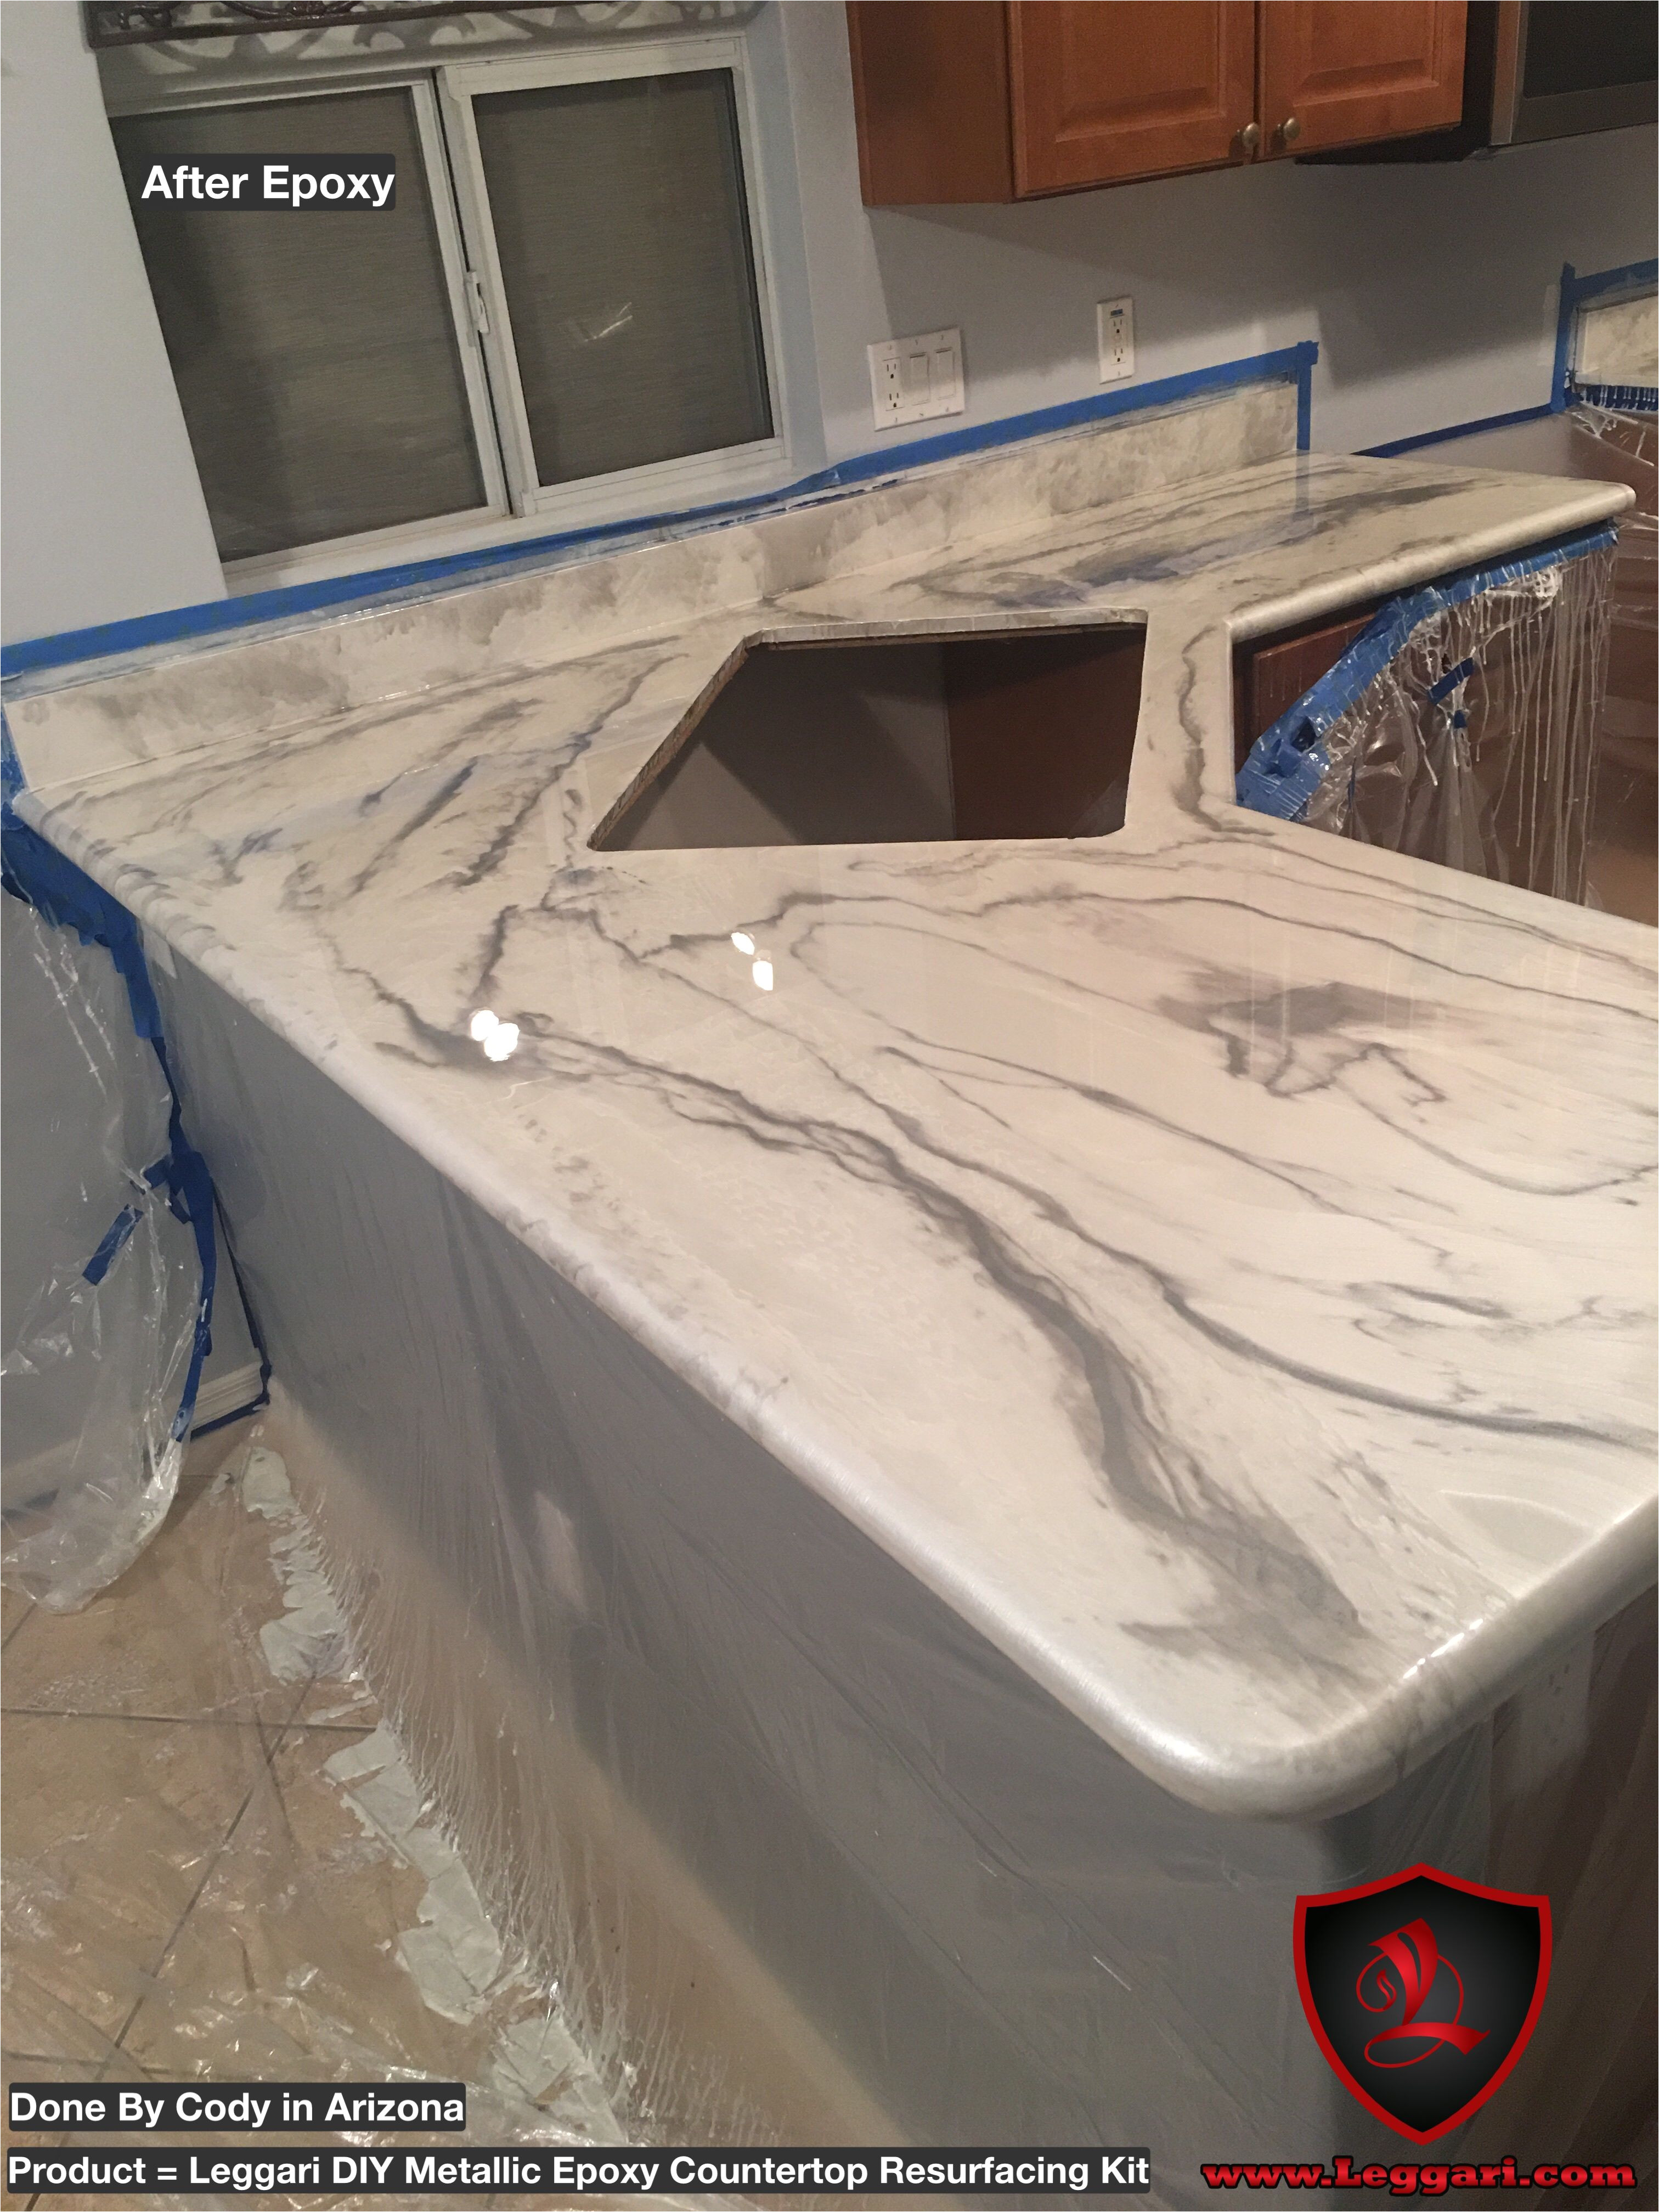 Leggari Epoxy Countertop Kits Uk Another First Time User Of Our Products and It Looks Amazing